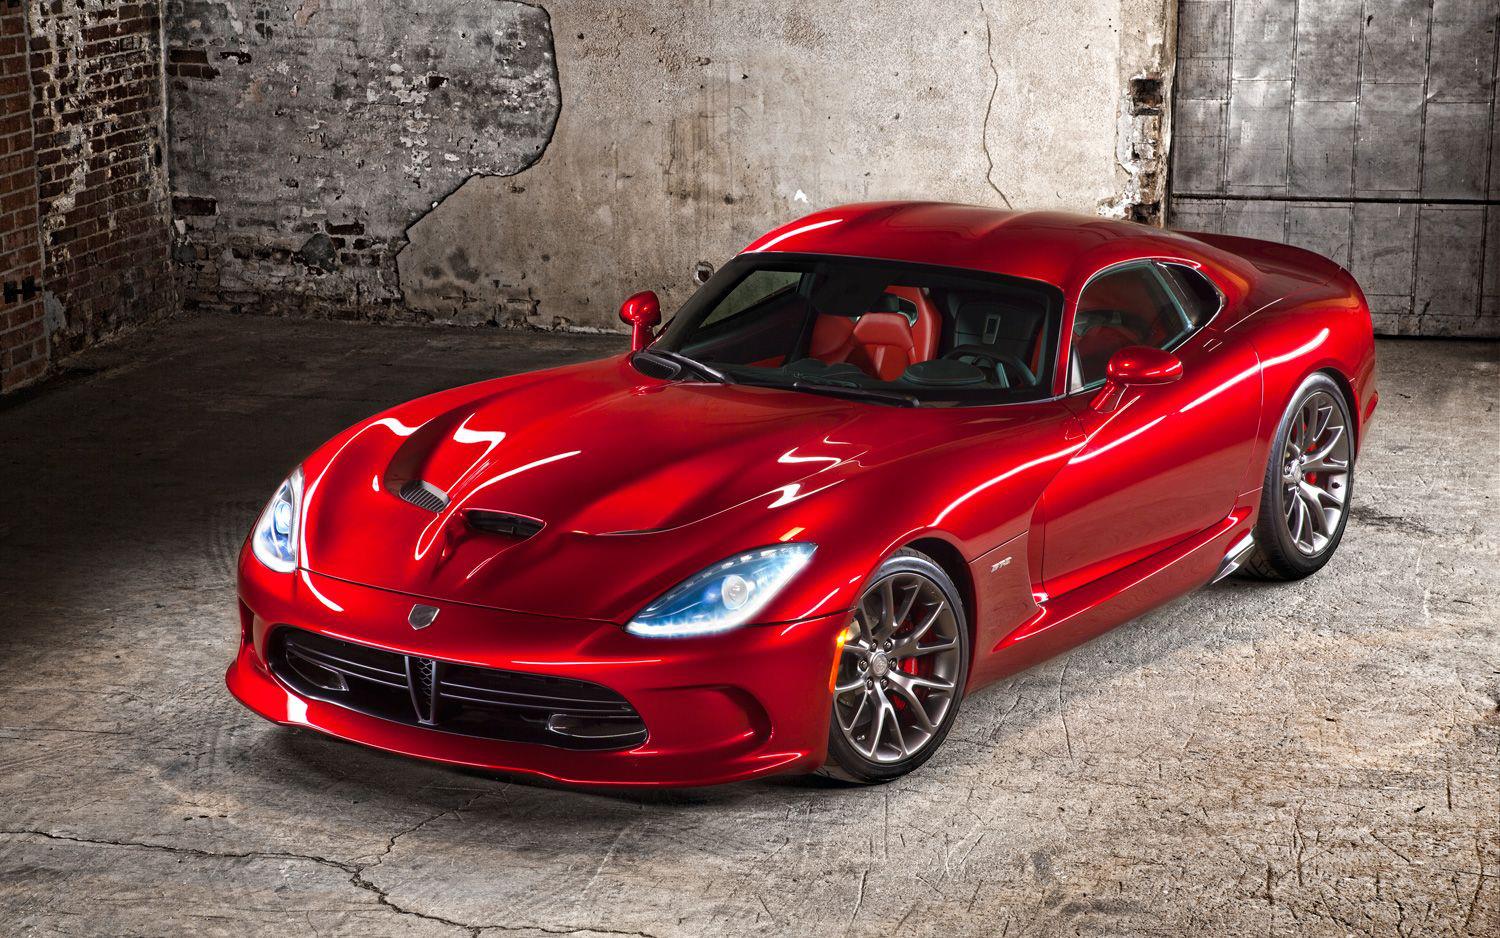 2012 New York Auto Show: 2013 SRT Viper Officially Slithers On Stage